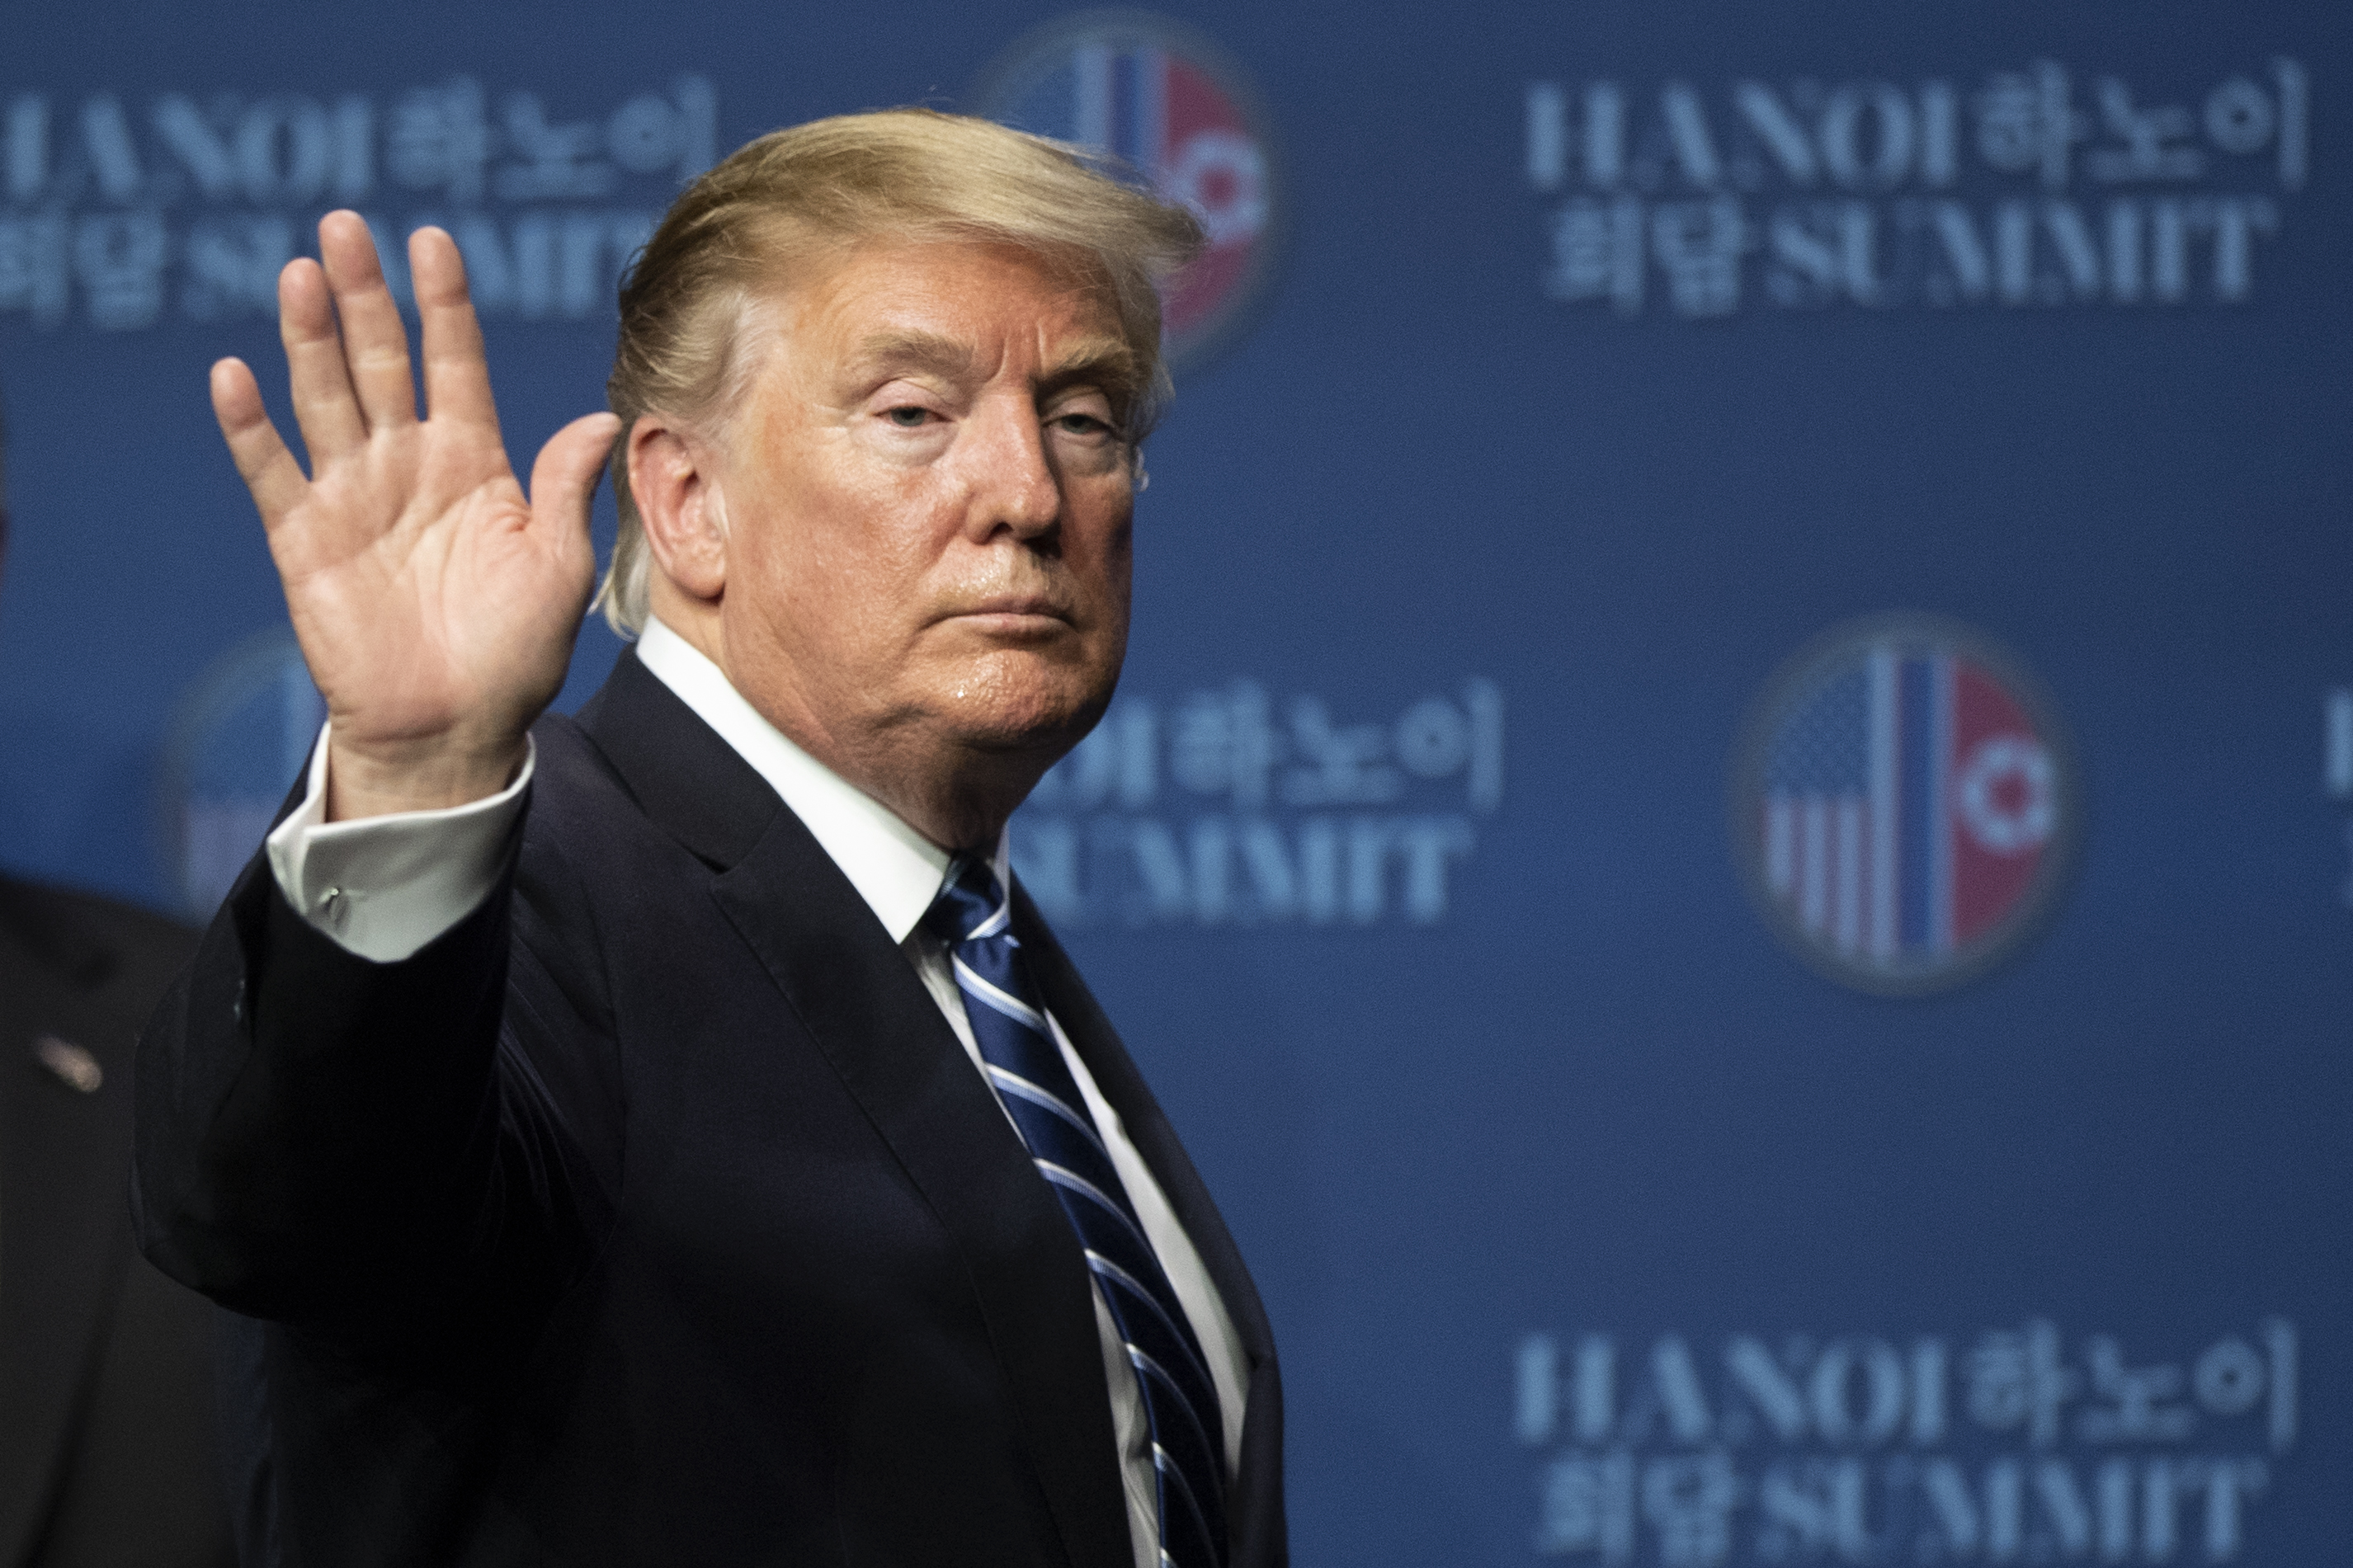 President Donald Trump attends a news conference following his second summit meeting with North Korean leader Kim Jong Un on February 28, 2019 in Hanoi, Vietnam.